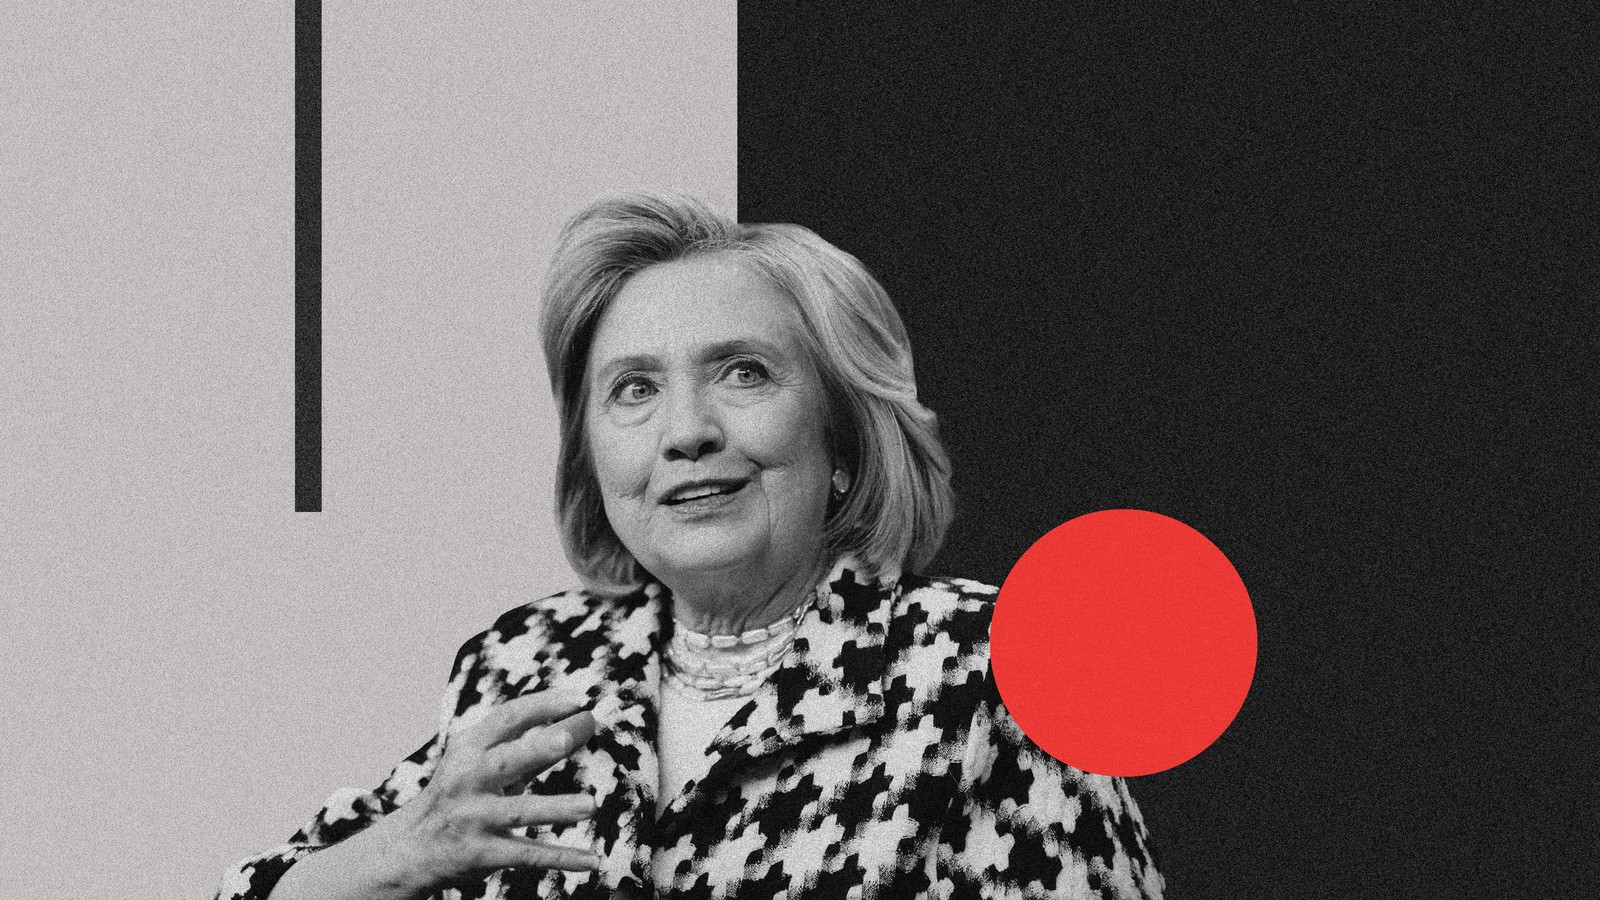 Hillary Clinton opens up about the moment she realized she lost